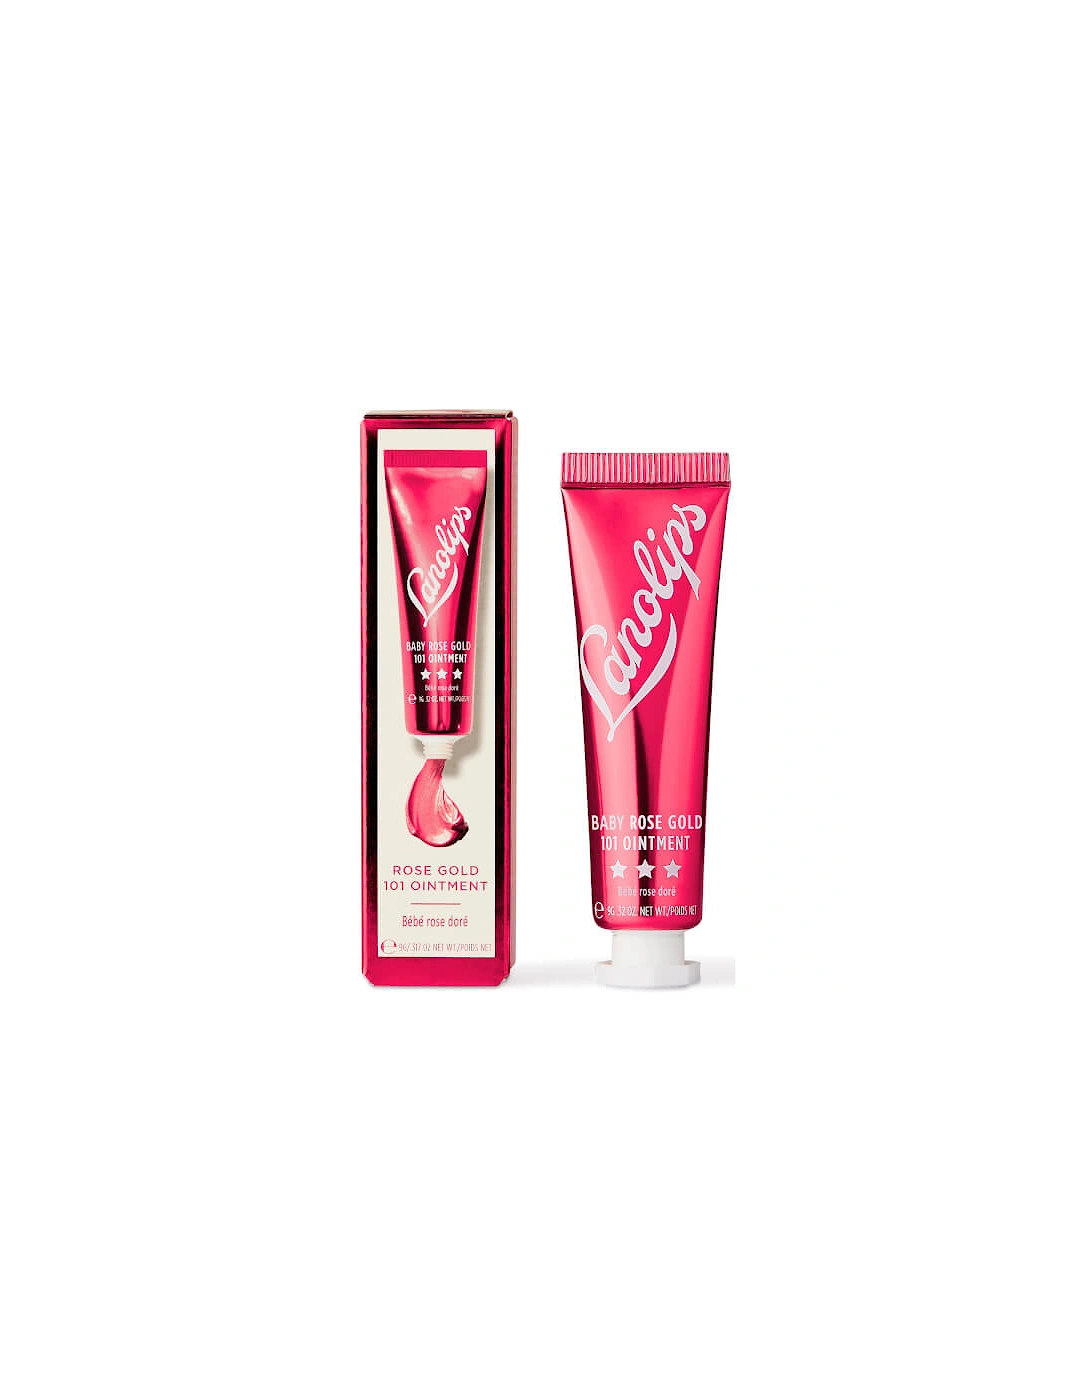 Baby Rose Gold 101 Lip Ointment 9g, 2 of 1